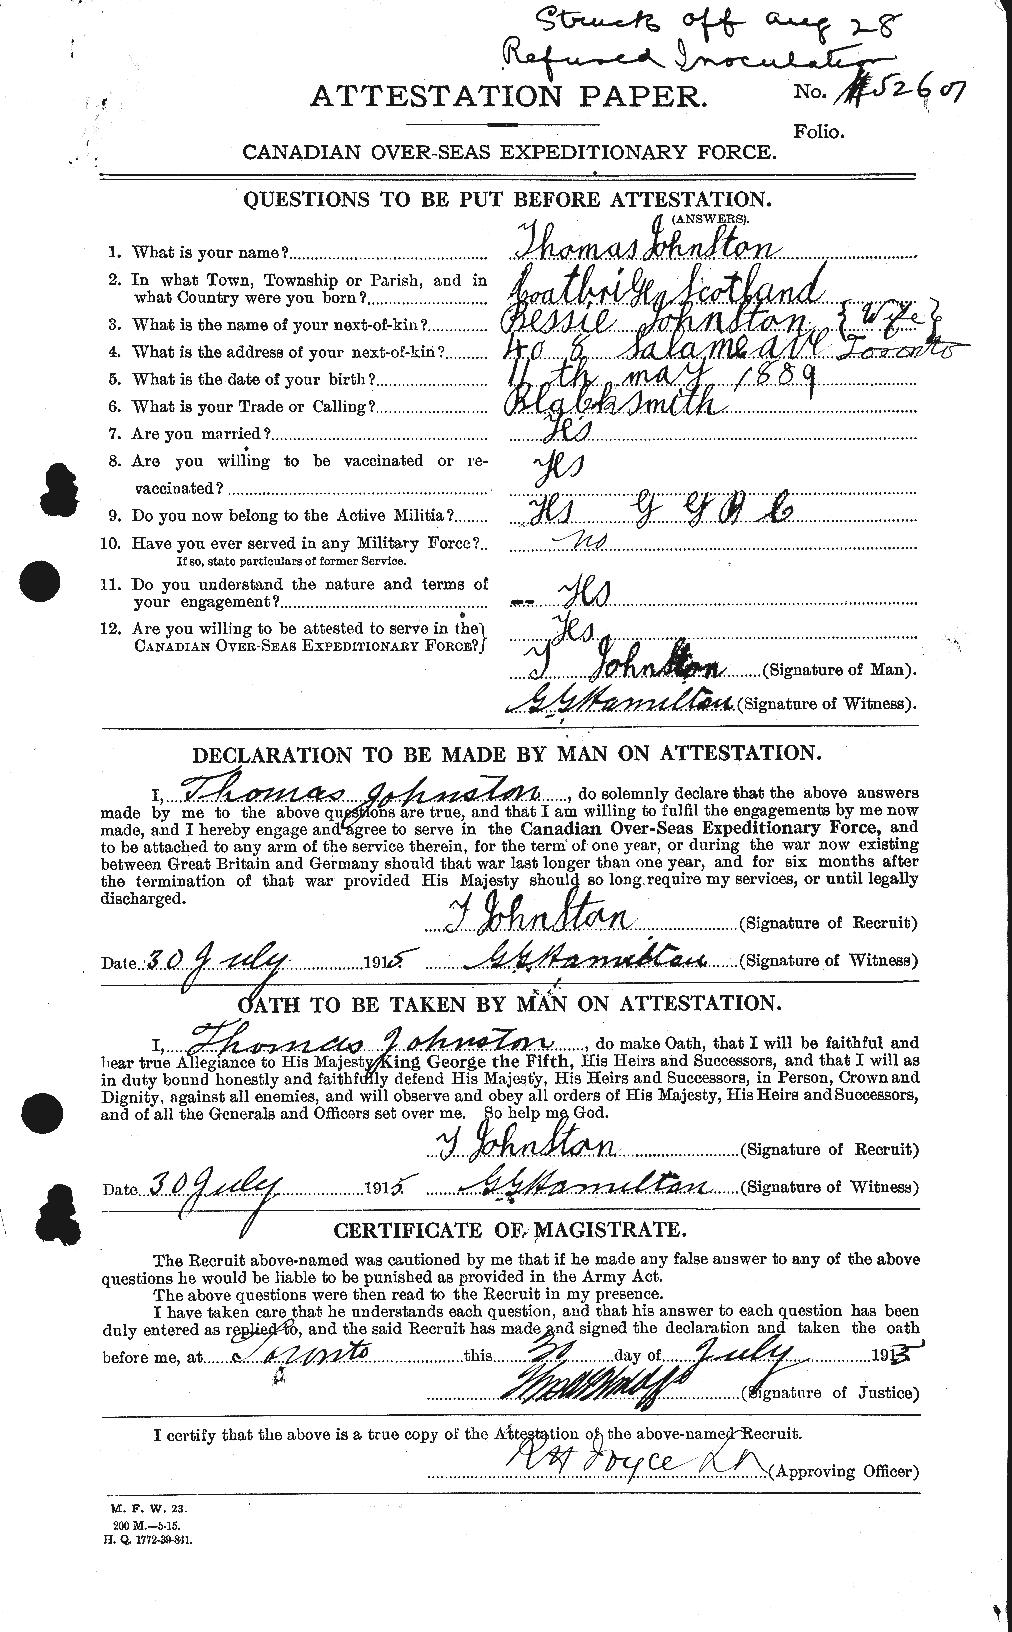 Personnel Records of the First World War - CEF 427129a